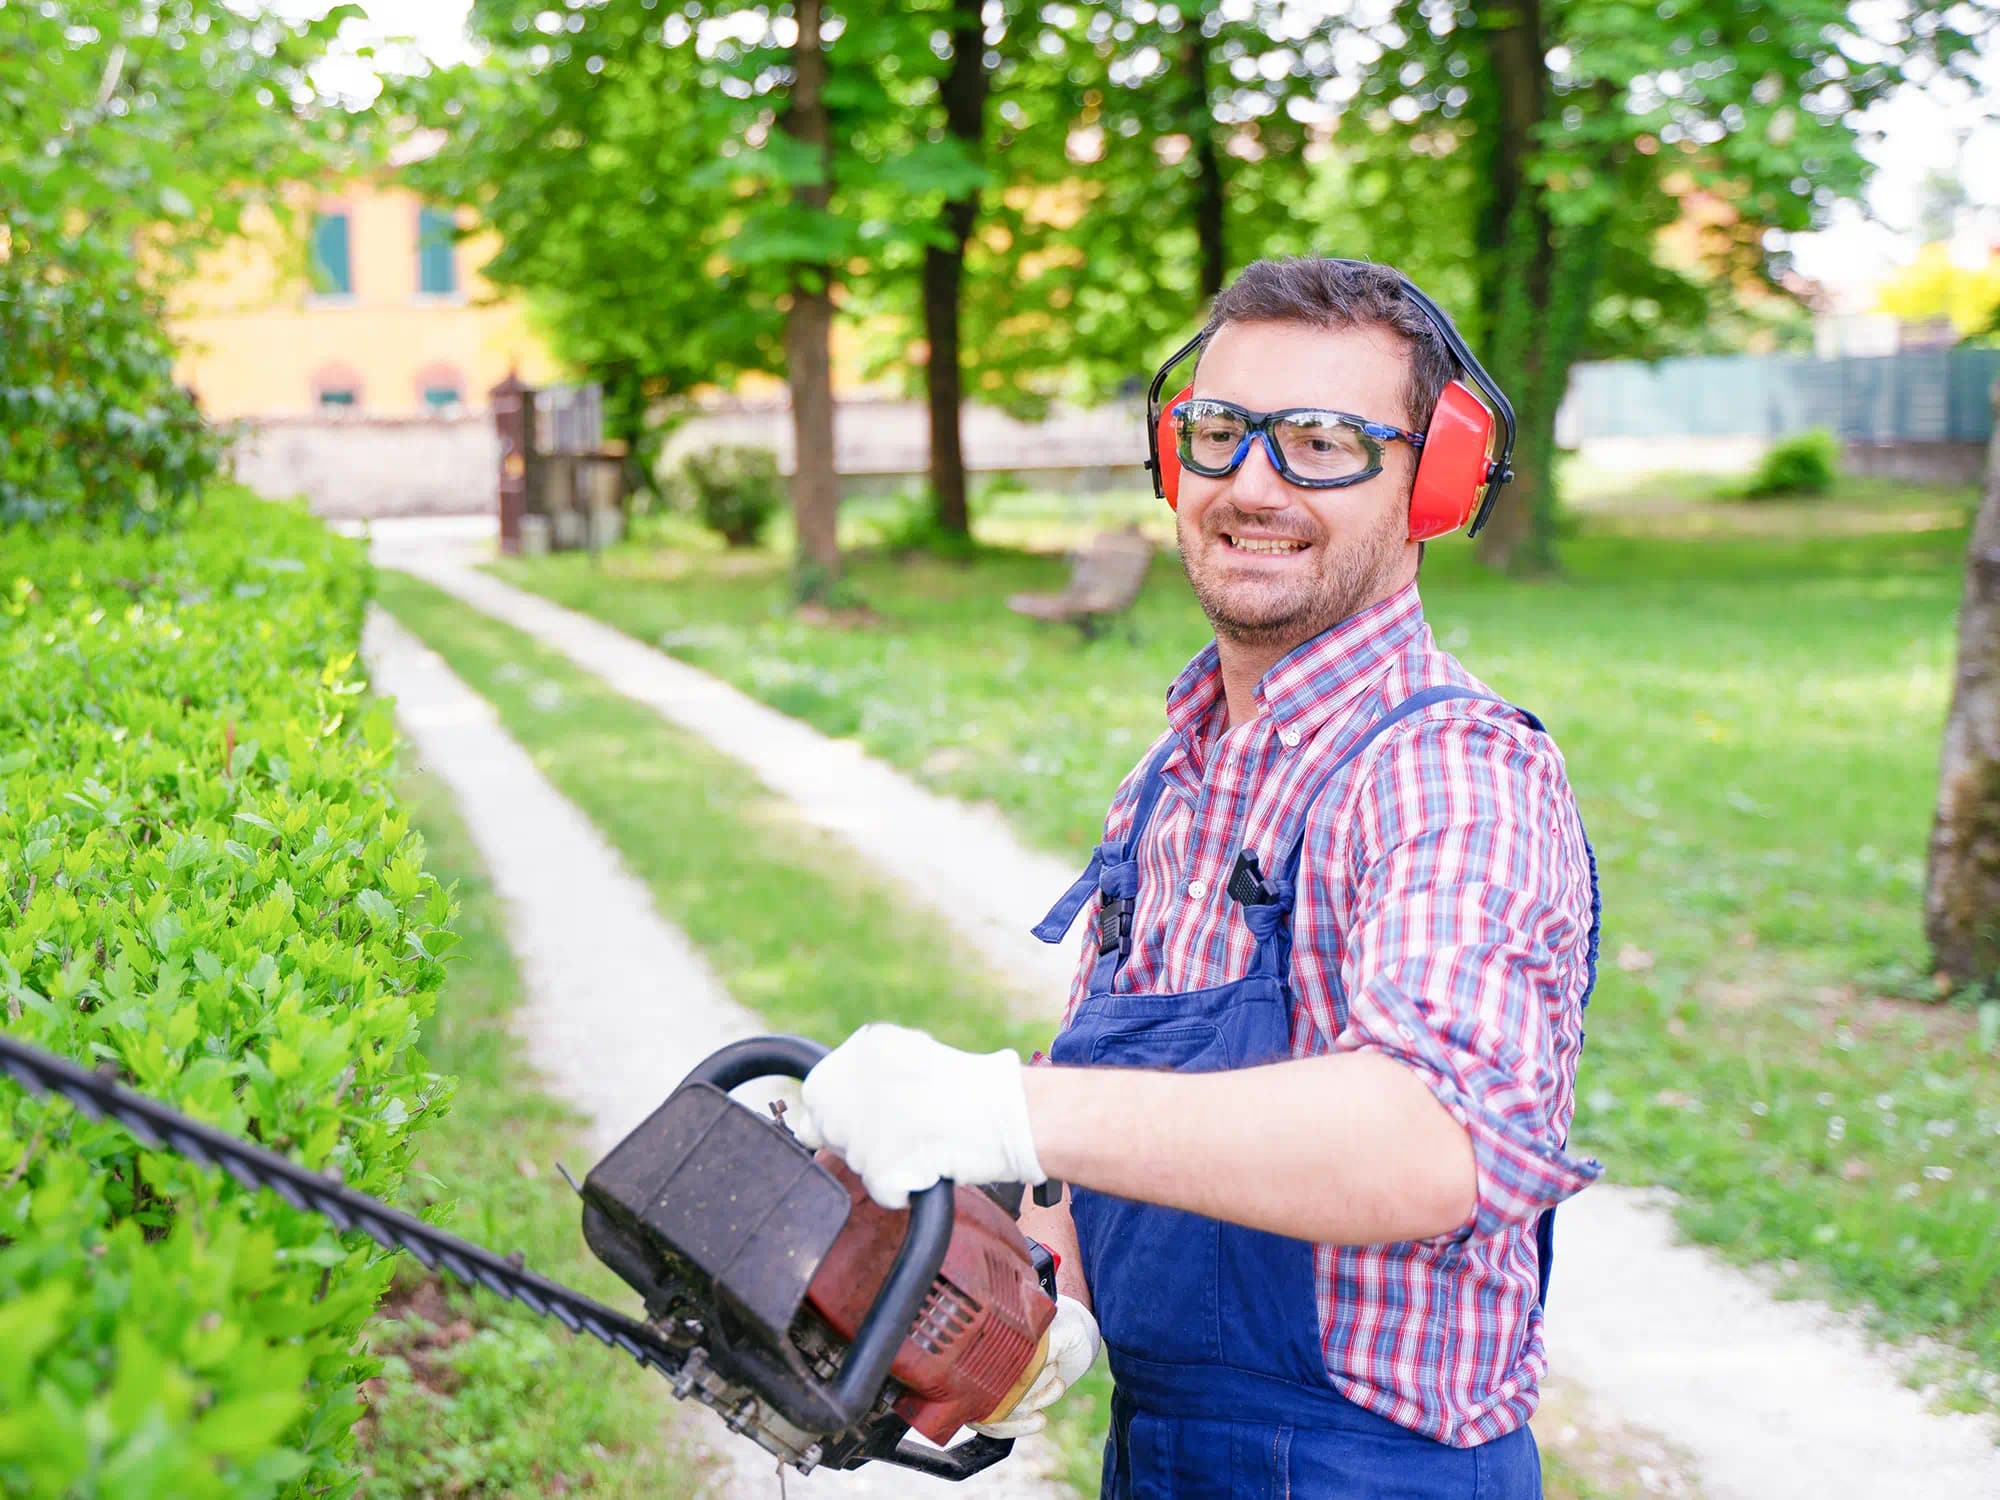 Protect you hearing when doing noisy work such as cutting your hedge to prevent hearing loss